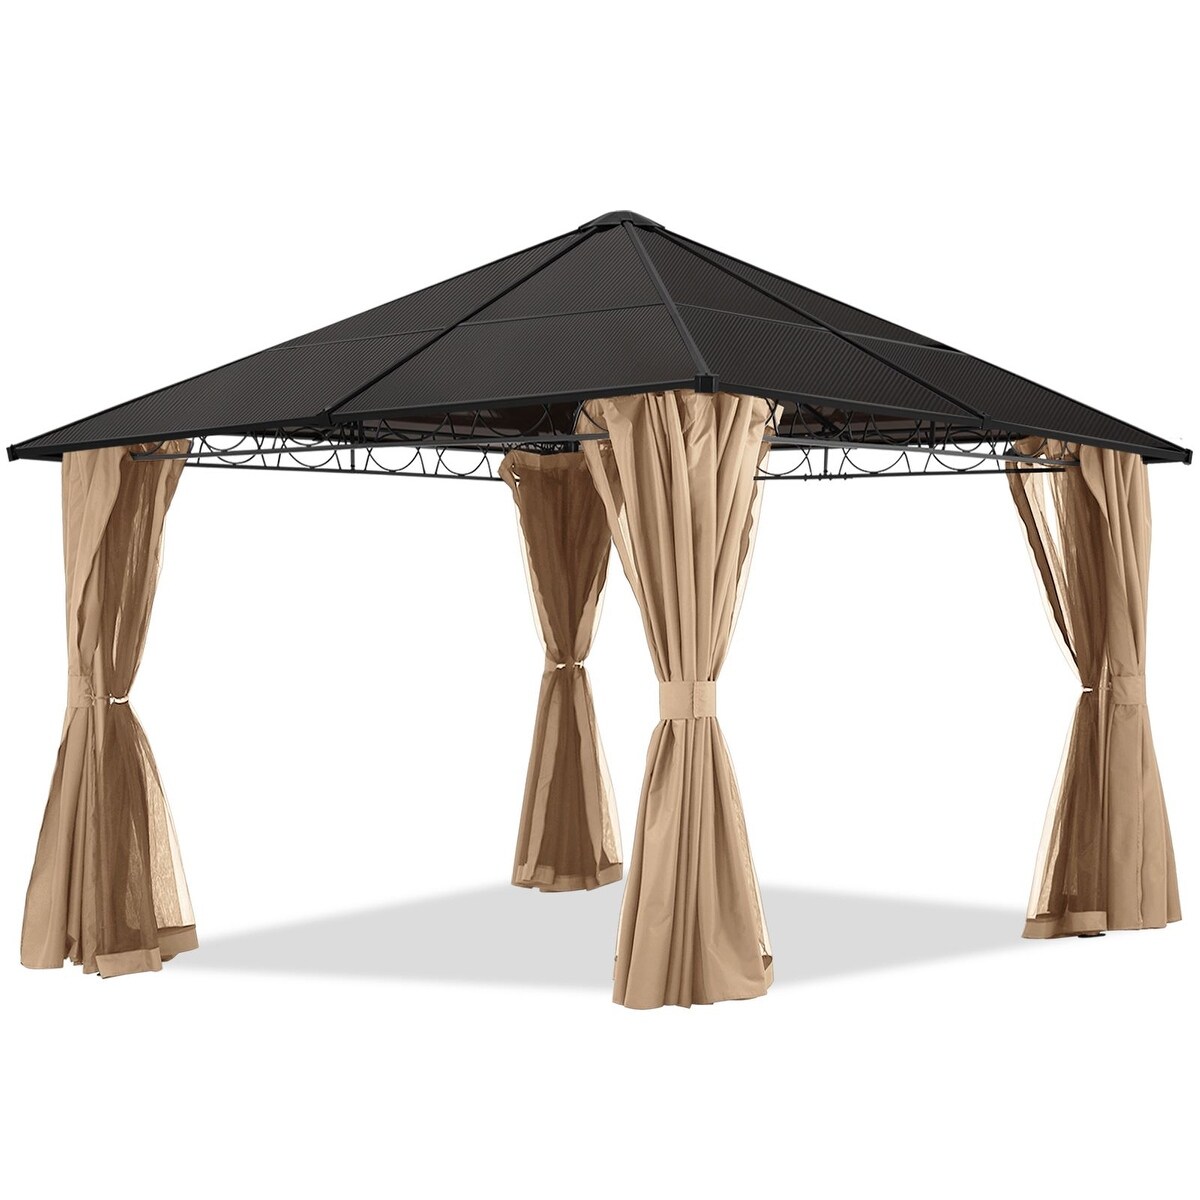 ABCCANOPY Hardtop Patio Gazebo Steel Frame with Privacy Curtains